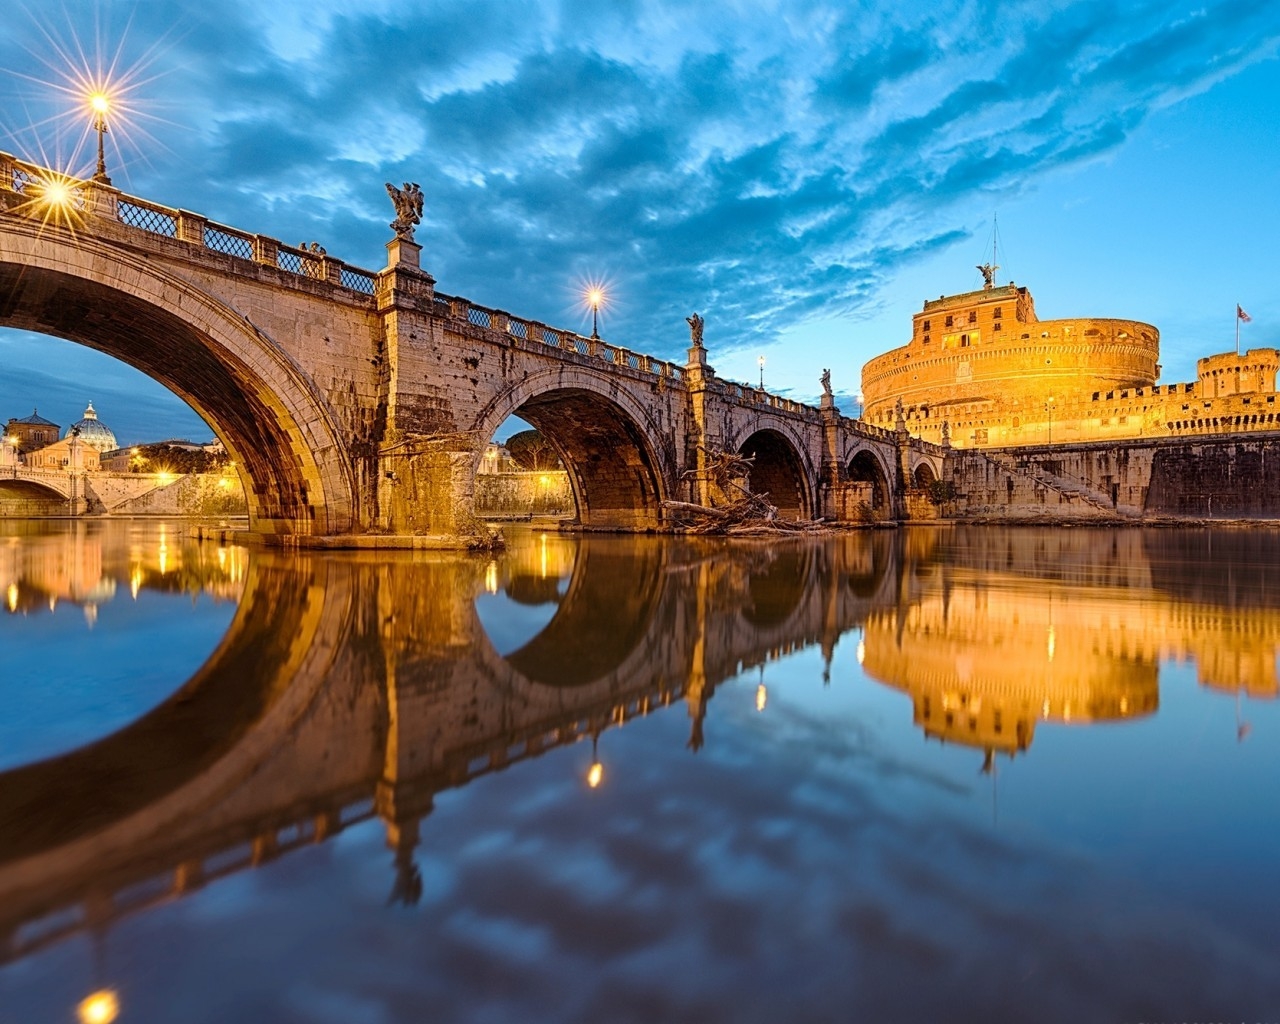 View of St Angelo Bridge for 1280 x 1024 resolution